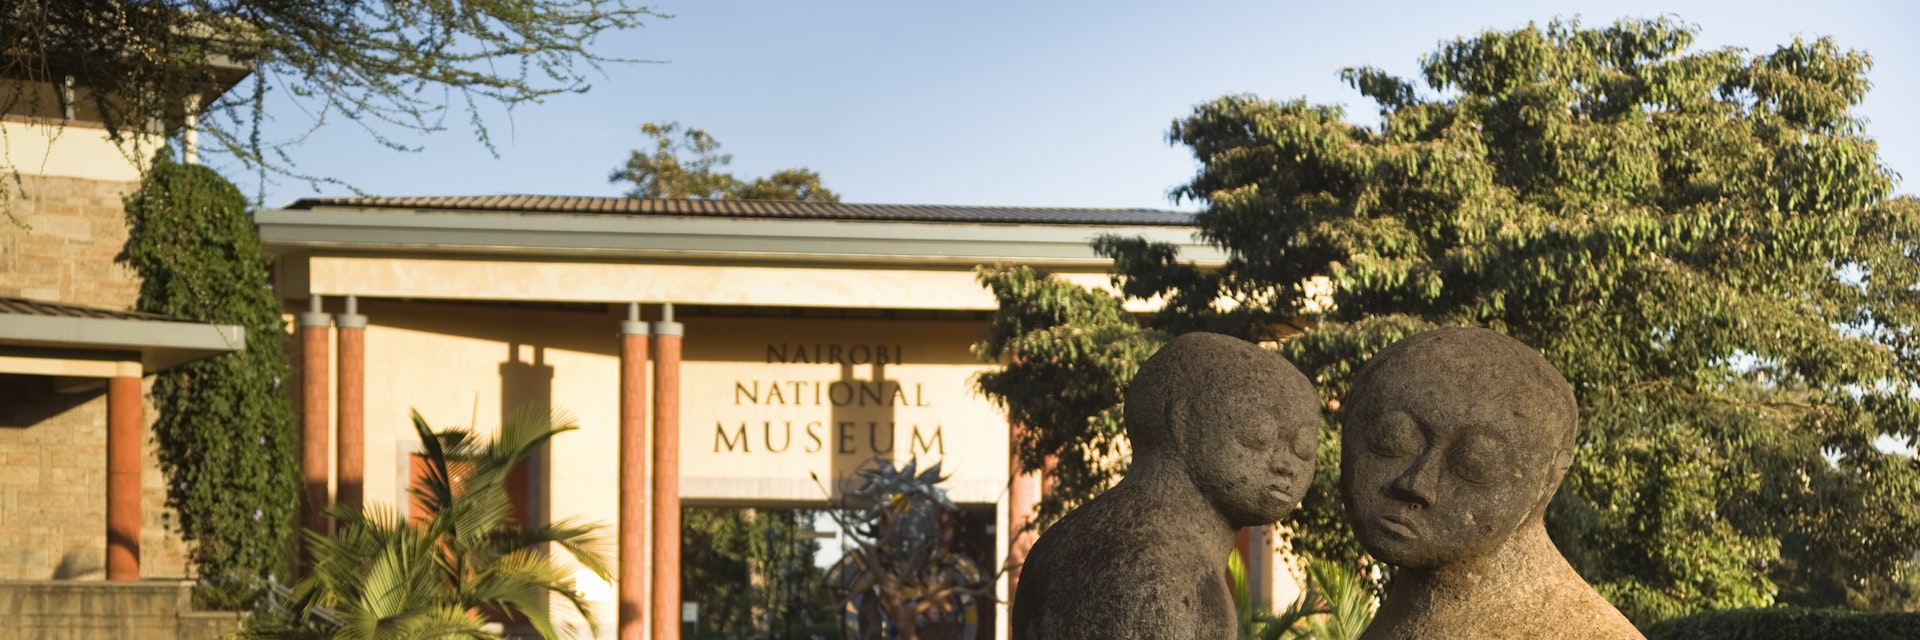 Statue in front of Nairobi National museum.